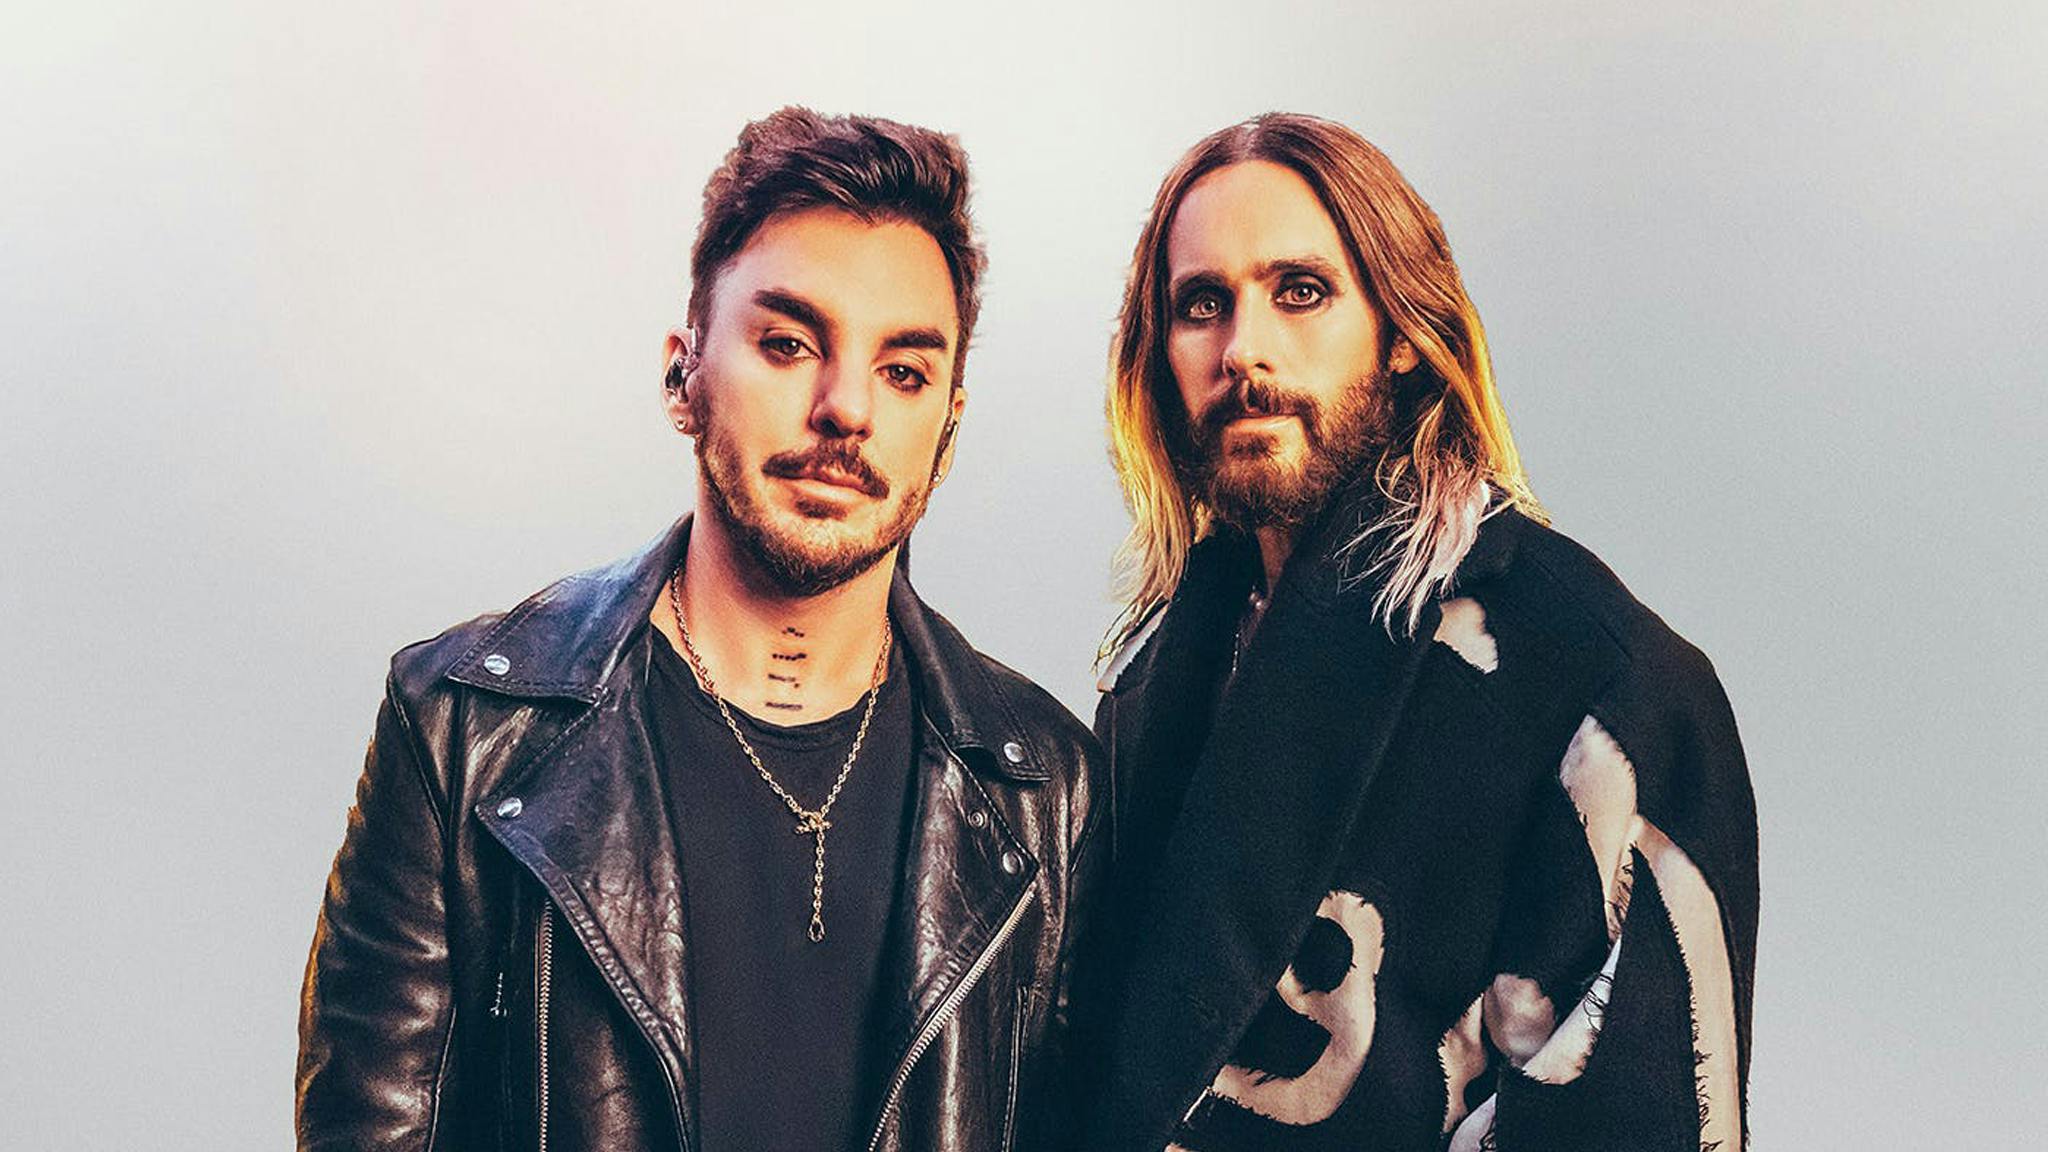 Jared Leto: “Even on the darkest day there’s still a little hope in the world”